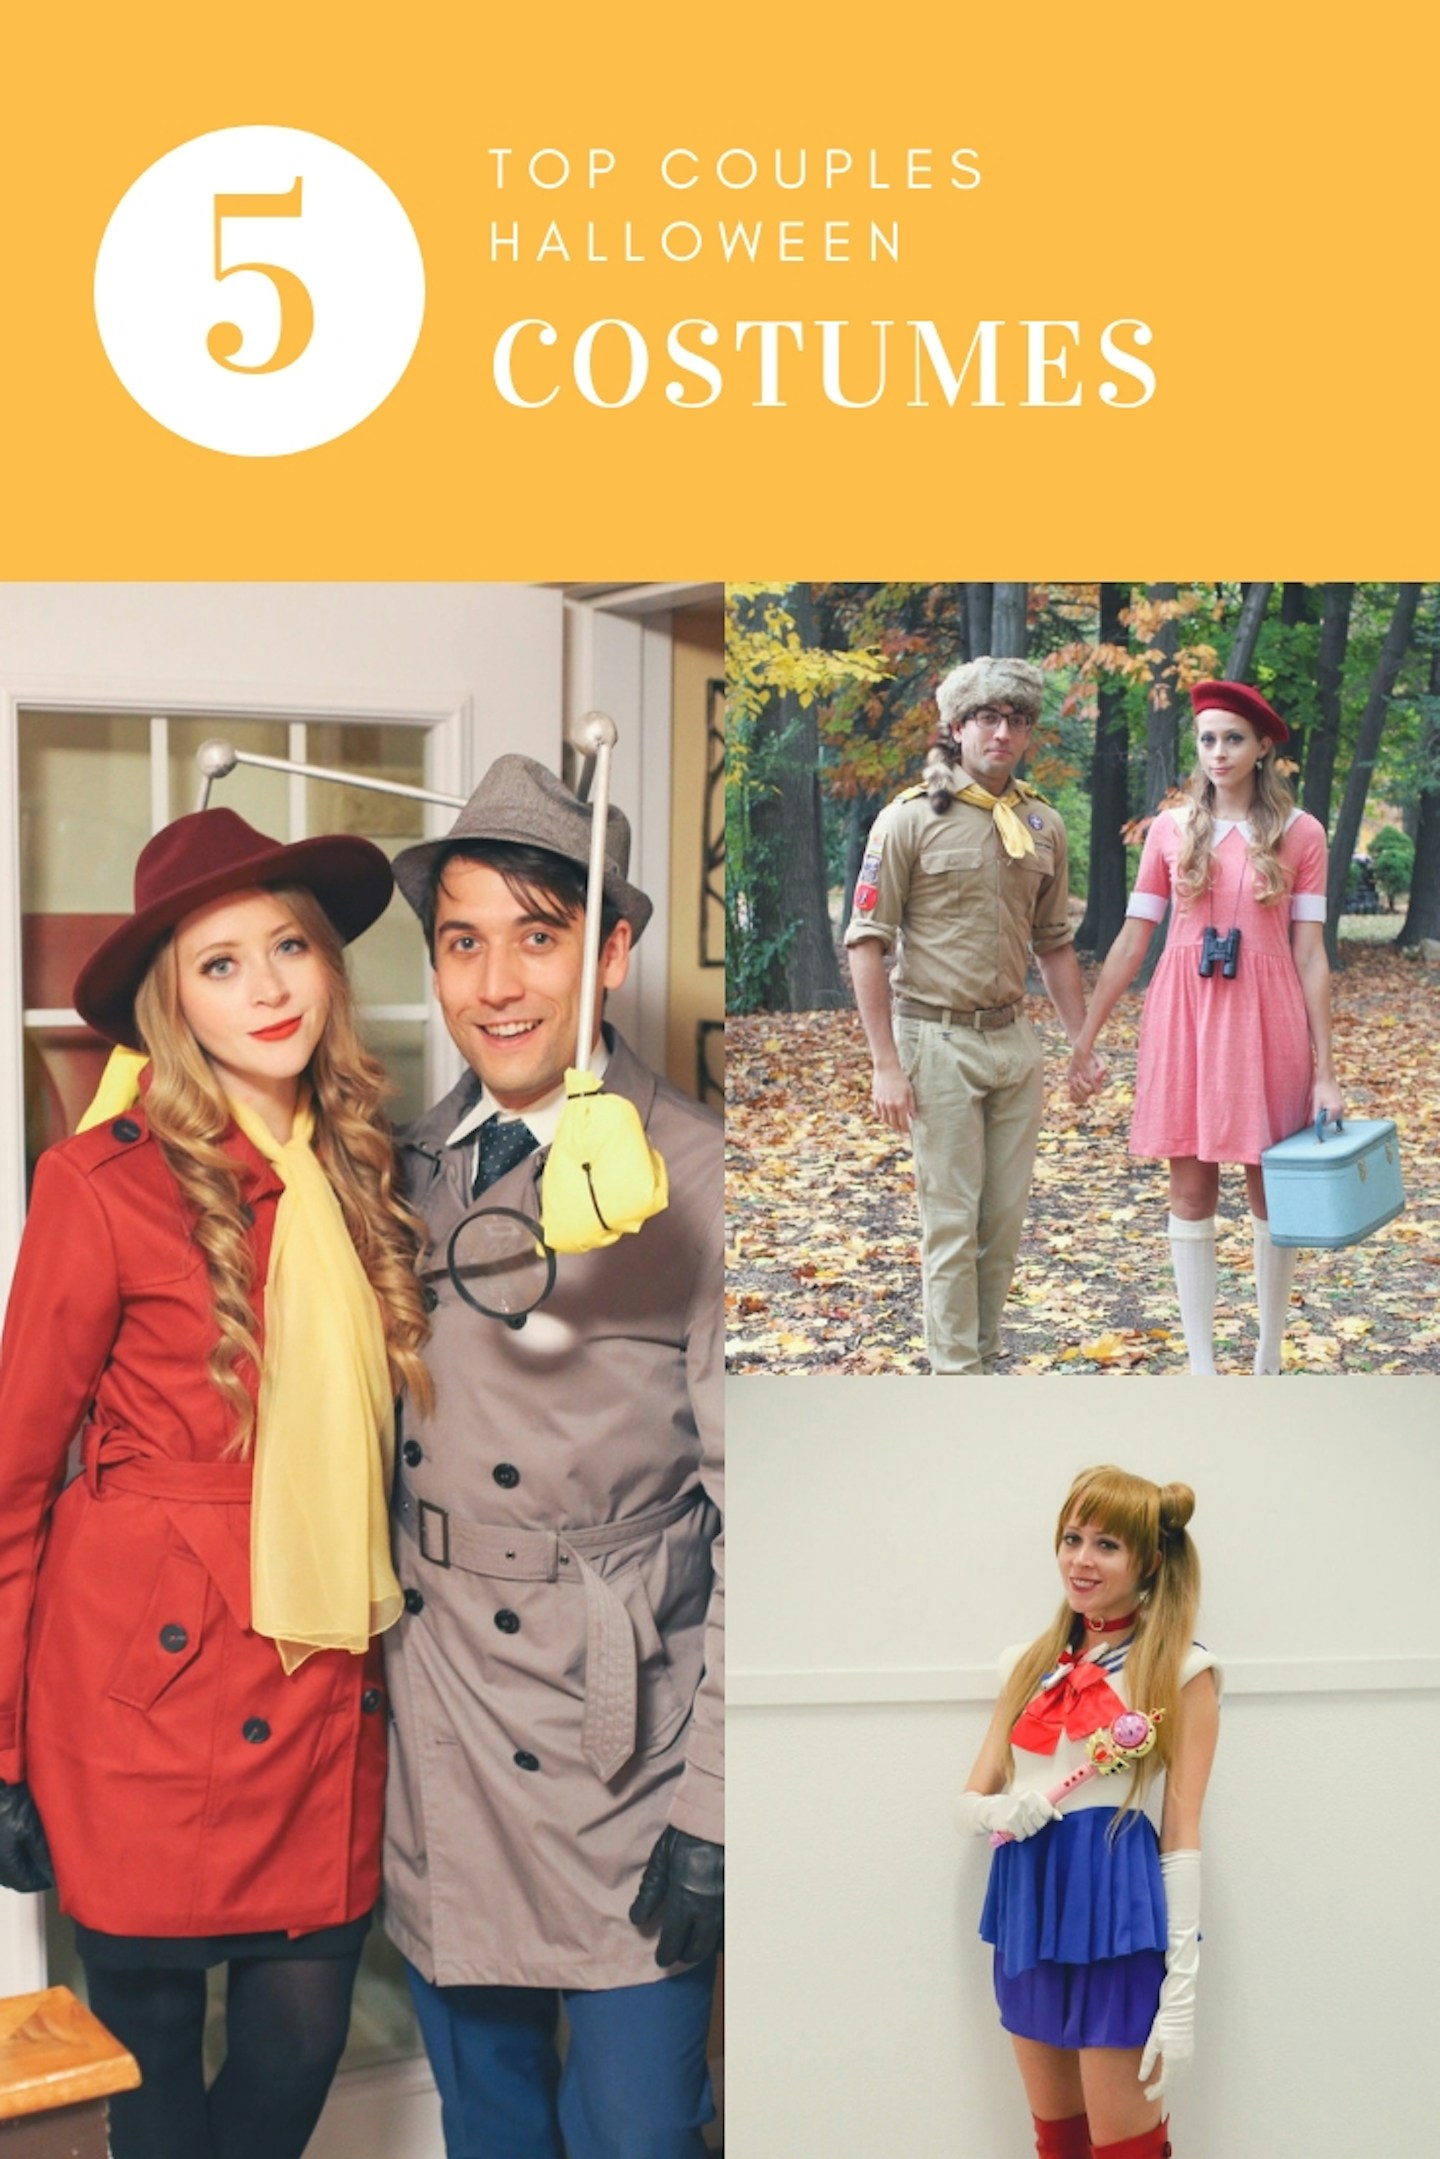 Top 5 Couples Halloween Costume Ideas: From Inspector Gadget and Carmen Sandiego to Moonrise Kingdom's Sam and Suzy, this blog post shares 5 unique couples Halloween costume ideas!